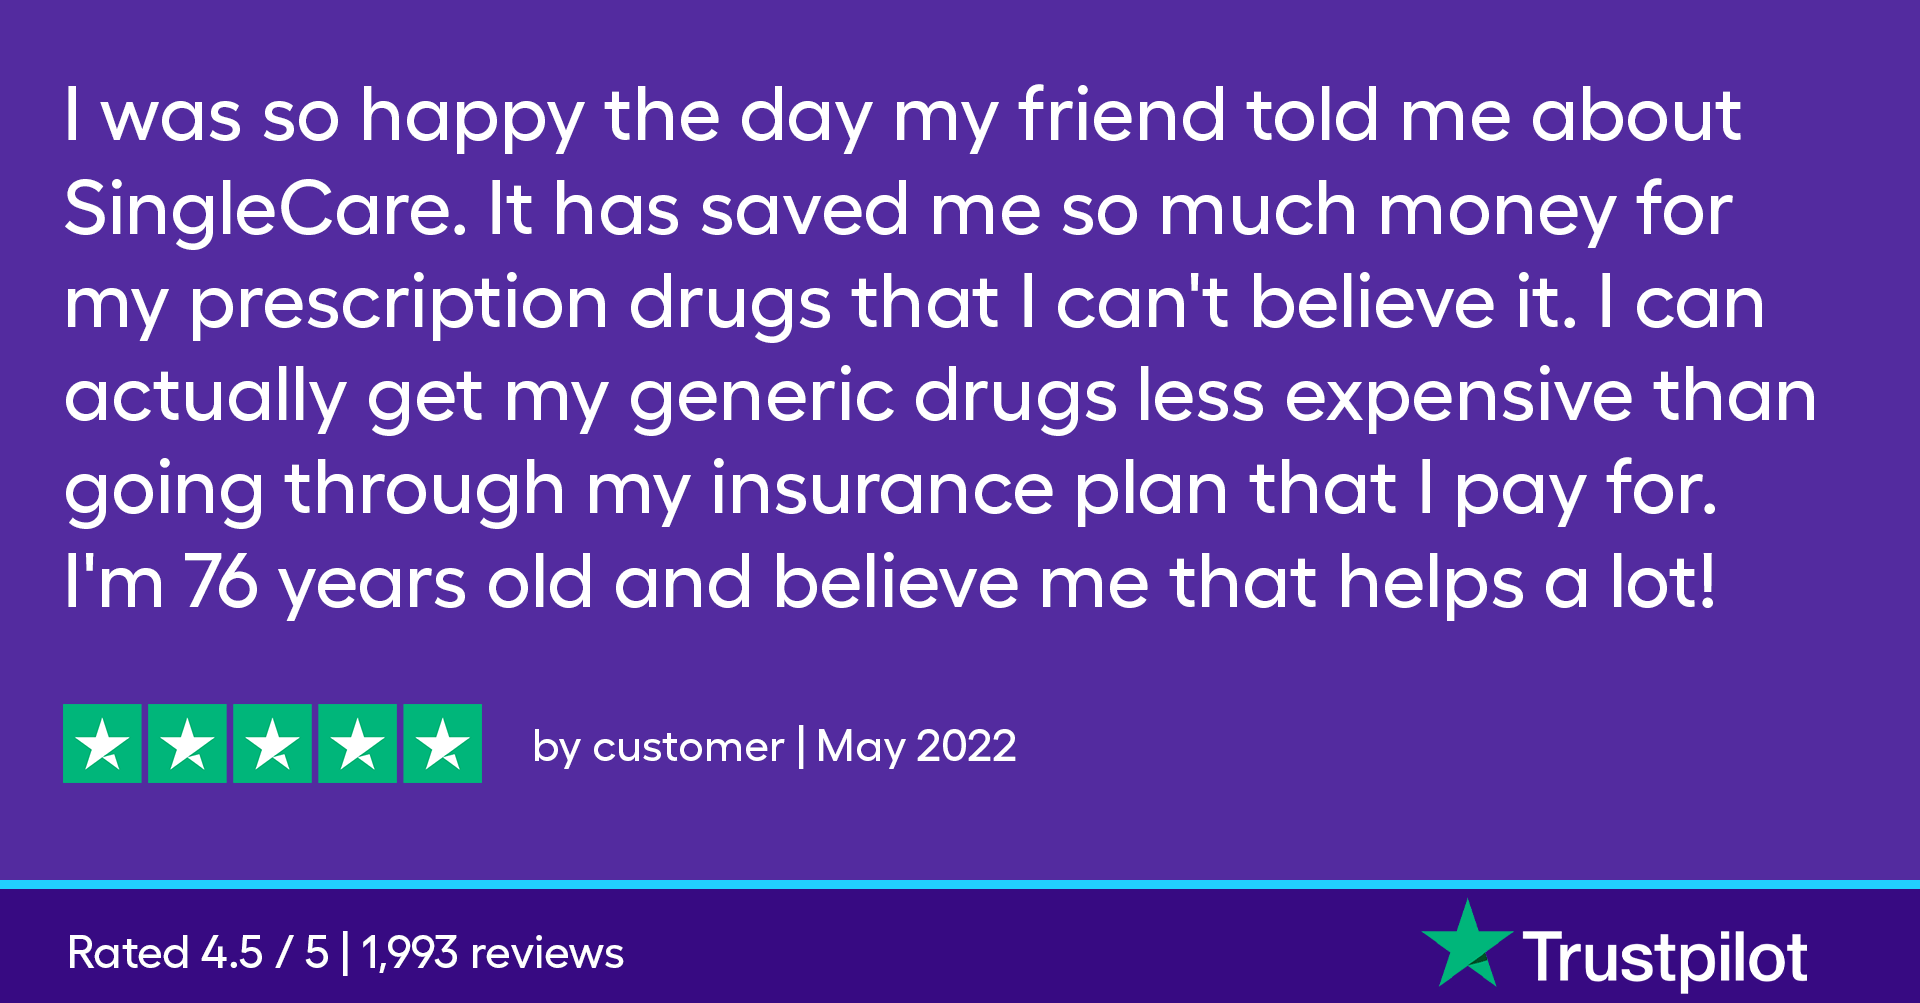 I was so happy the day my friend told me about SingleCare. It has saved me so much money for my prescription drugs that I can't believe it. I can actually get my generic drugs less expensive than going through my insurance plan that I pay for. I'm 76 years old and believe me that helps a lot!